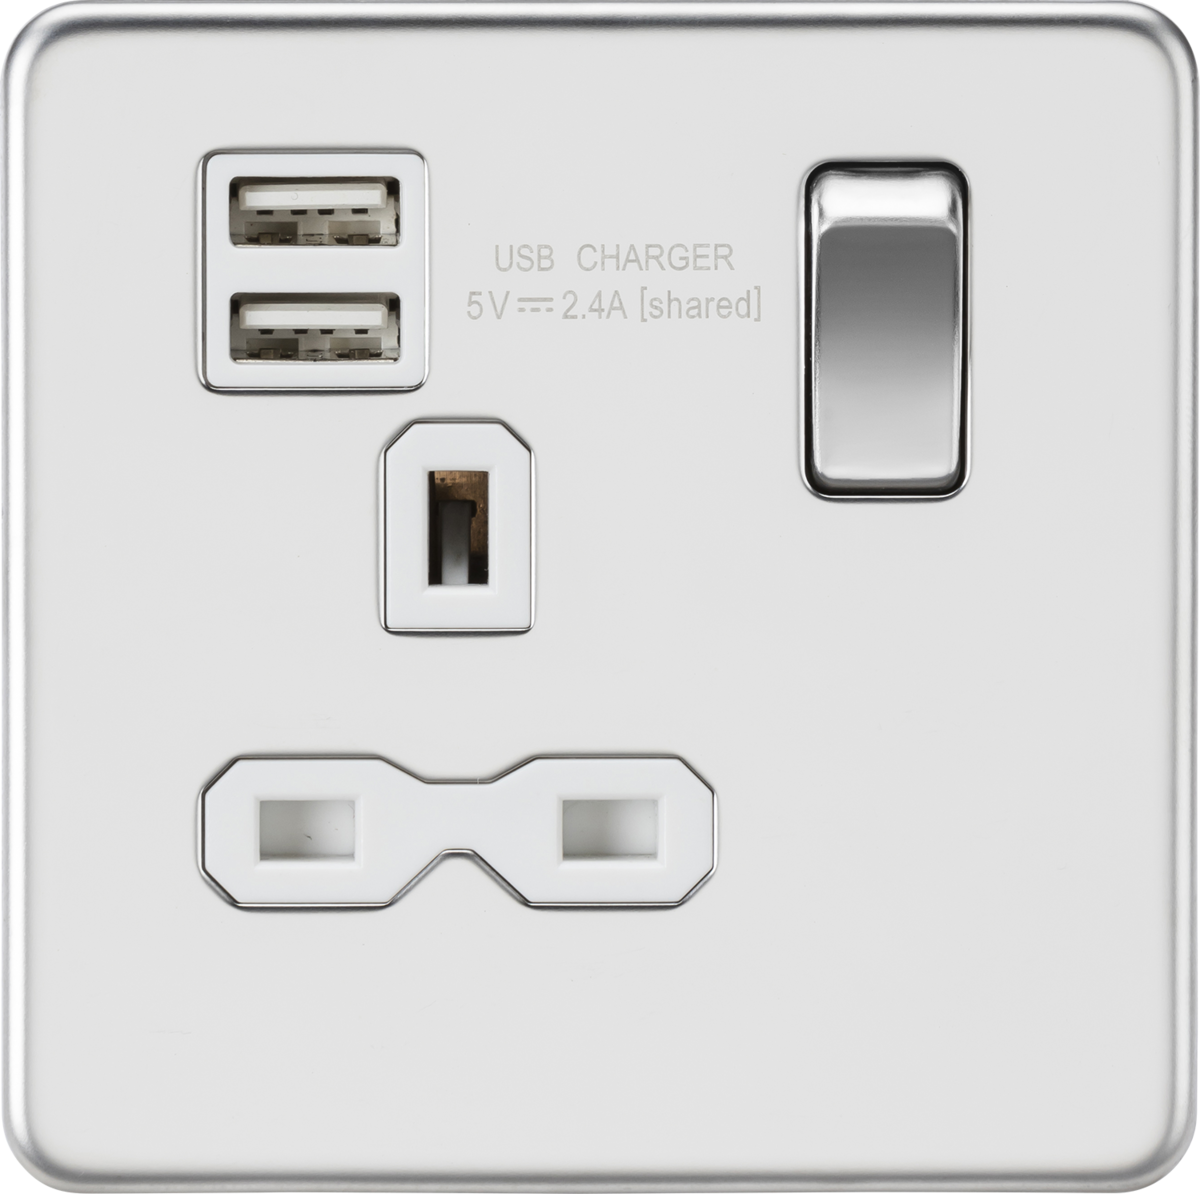 Knightsbridge Screwless 13A 1G switched socket with dual USB charger (2.4A) – polished chrome with white insert SFR9124PCW - West Midland Electrics | CCTV & Electrical Wholesaler